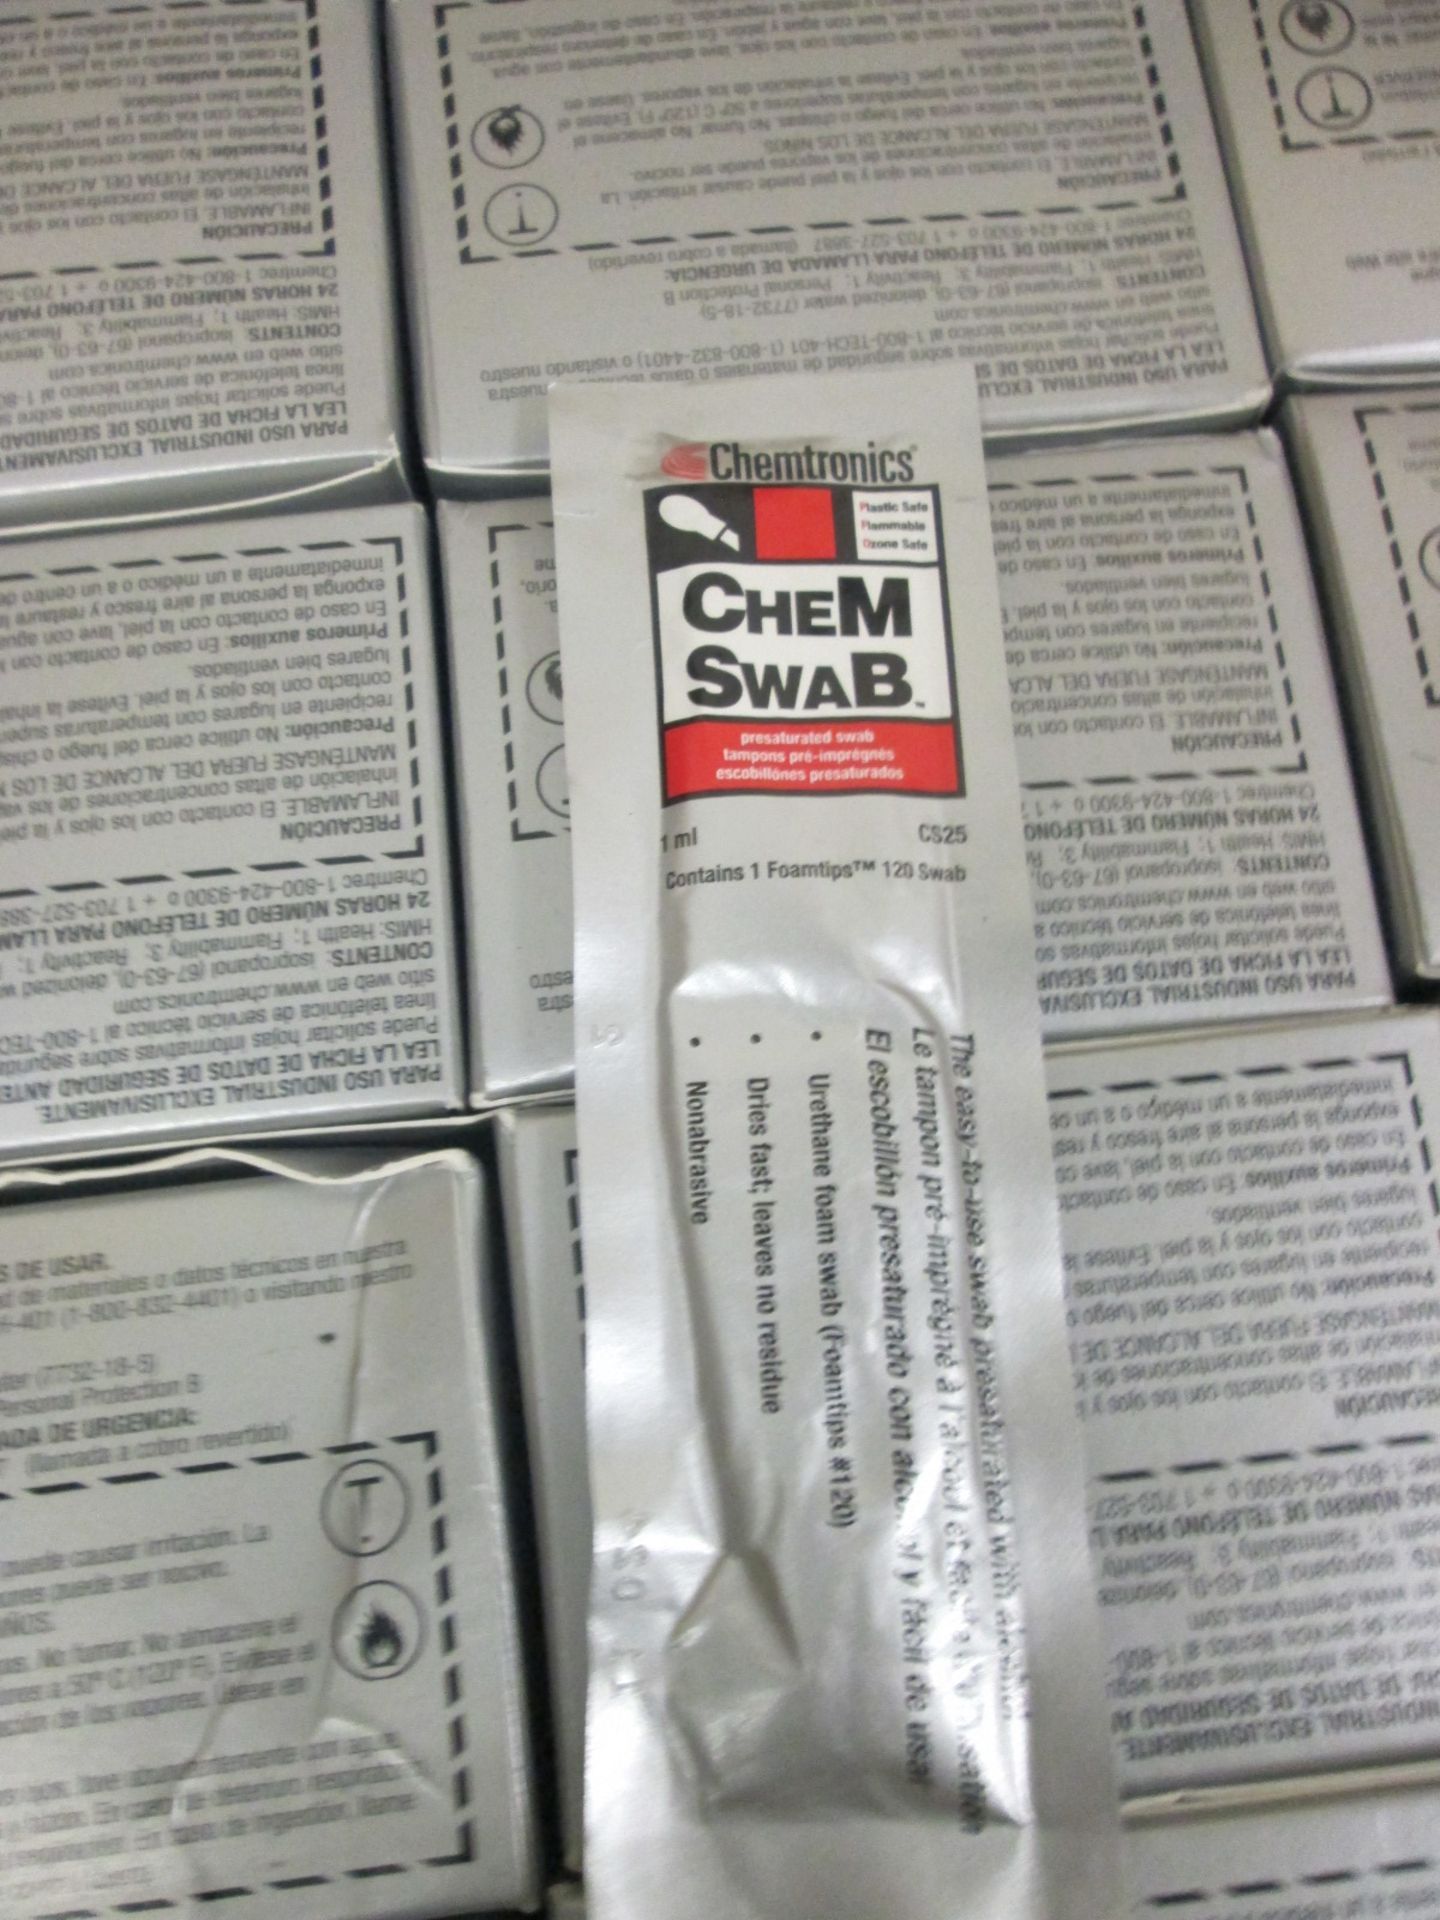 Chemtronics ChemSwabs - Approx 264 Boxes - Image 2 of 2